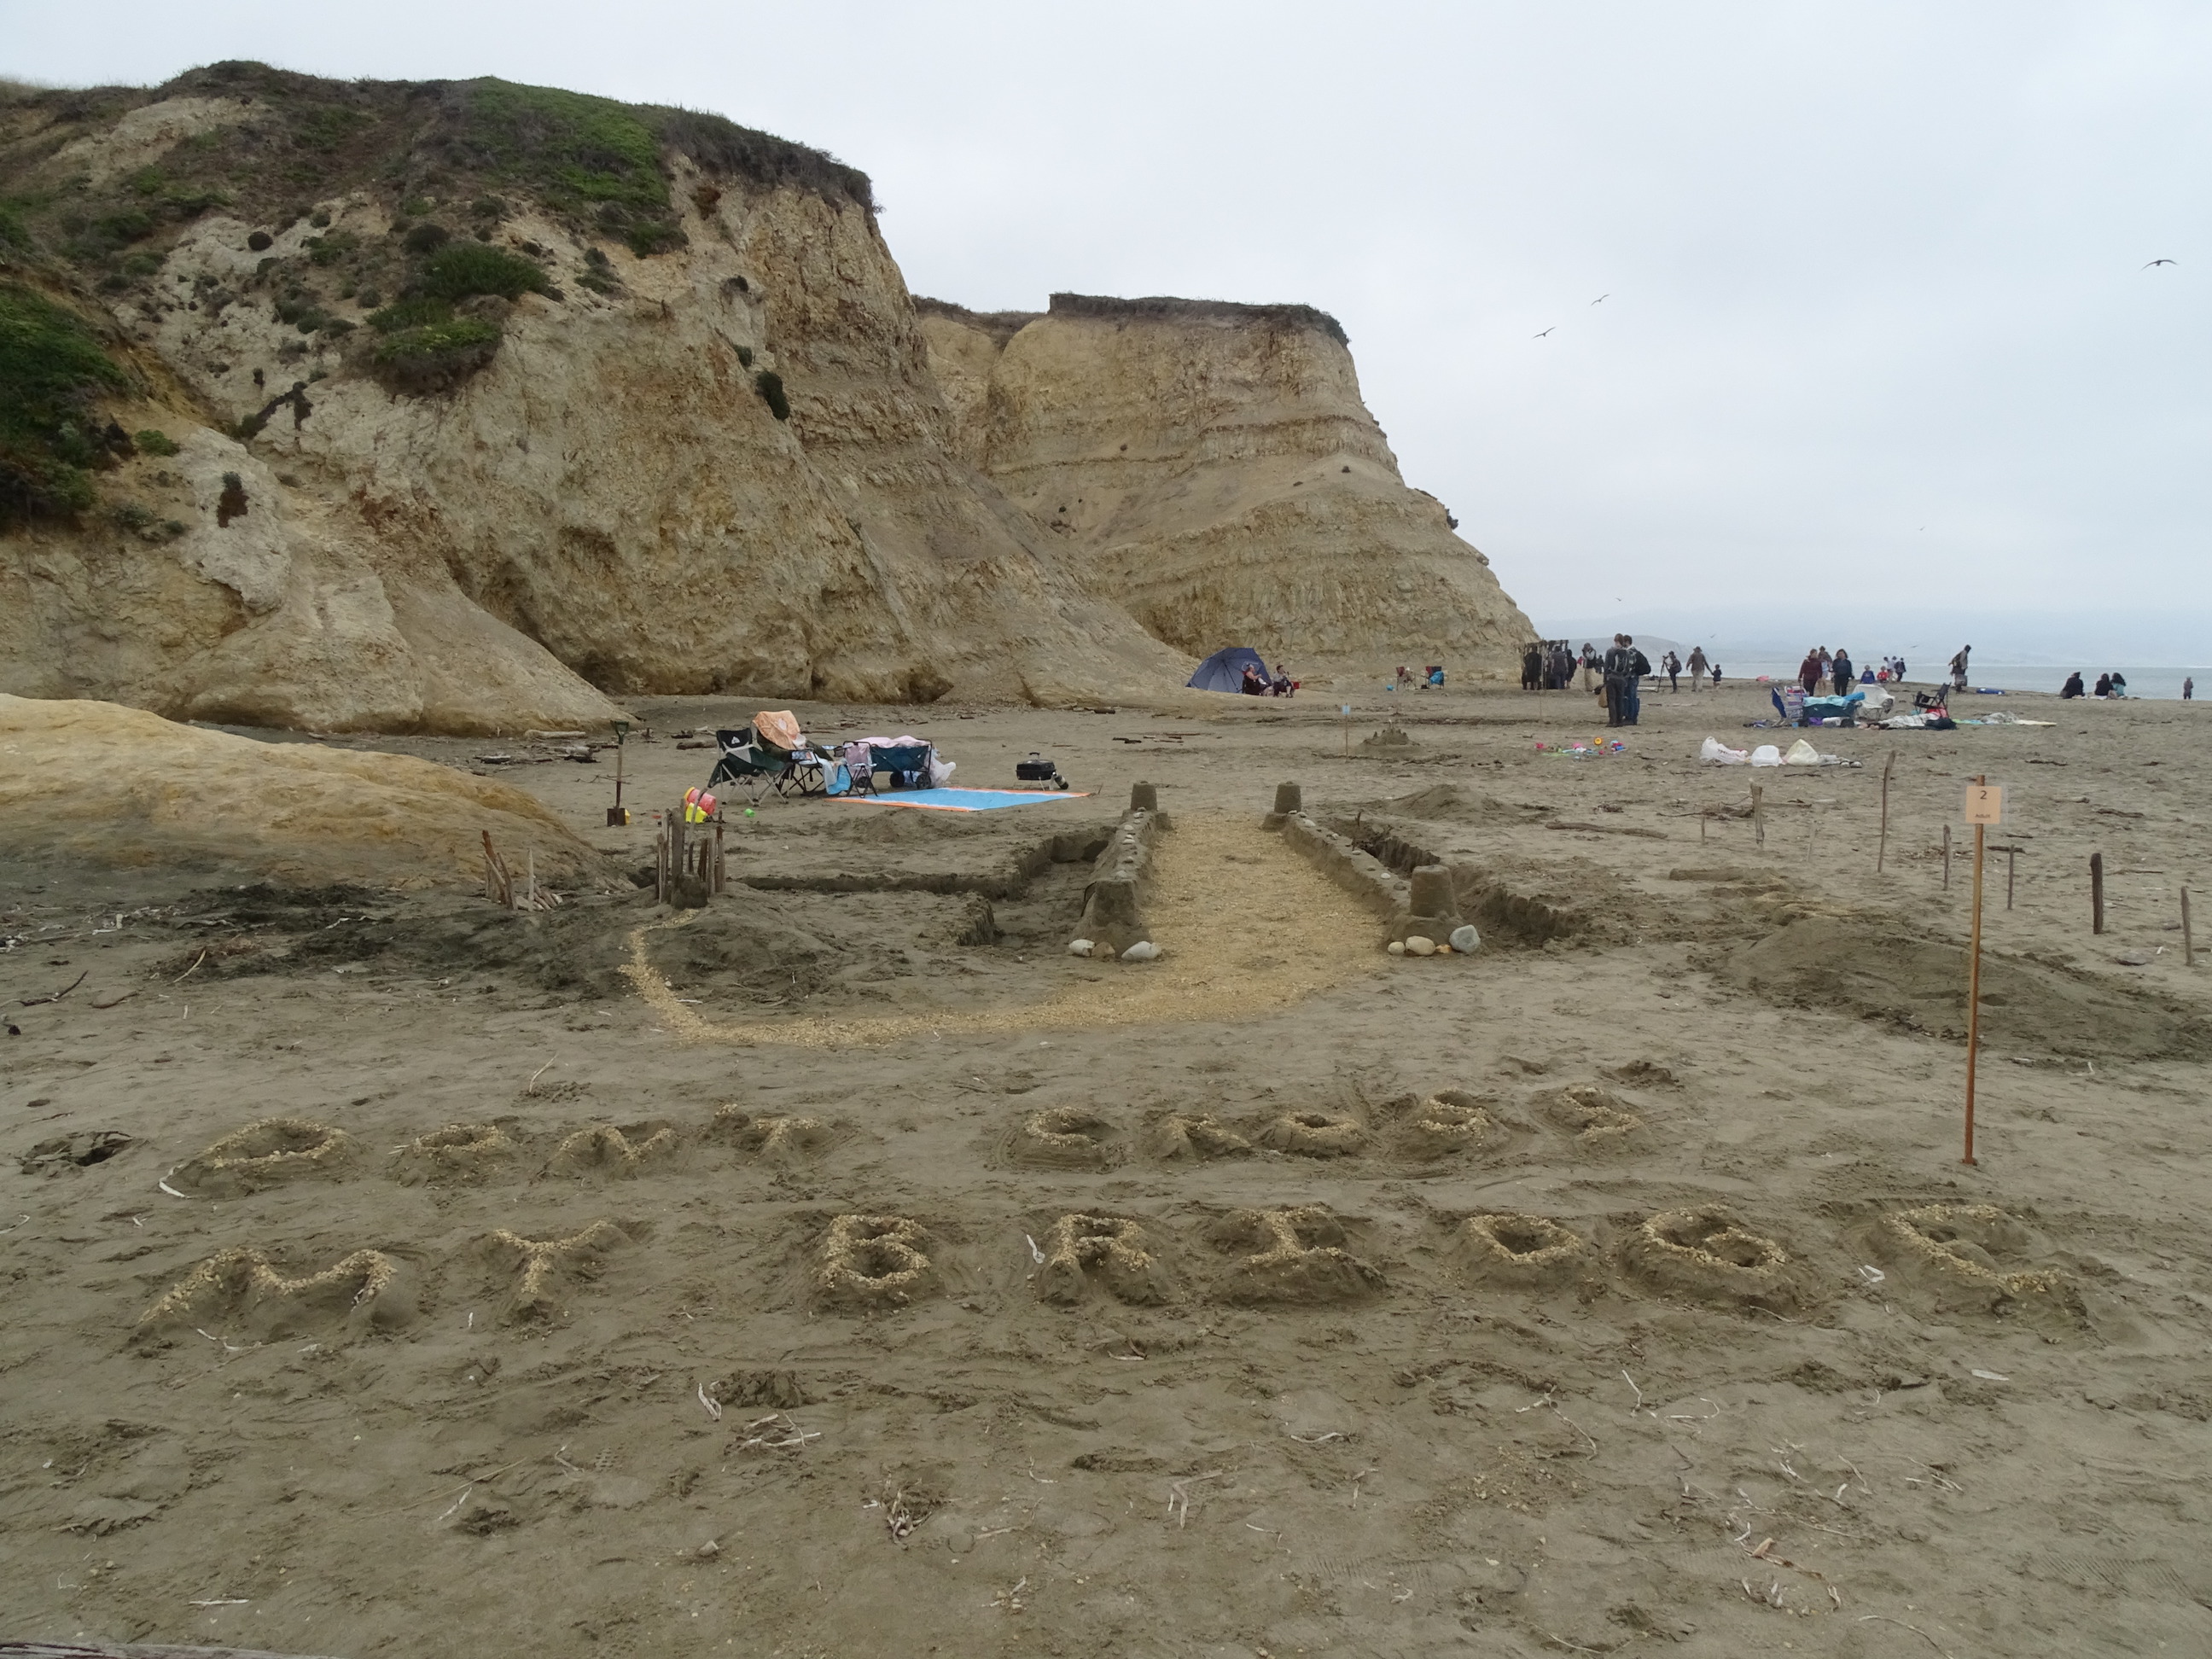 A large sand sculpture of a bridge with the phrase "Don't Cross My Bridge" in the foreground.